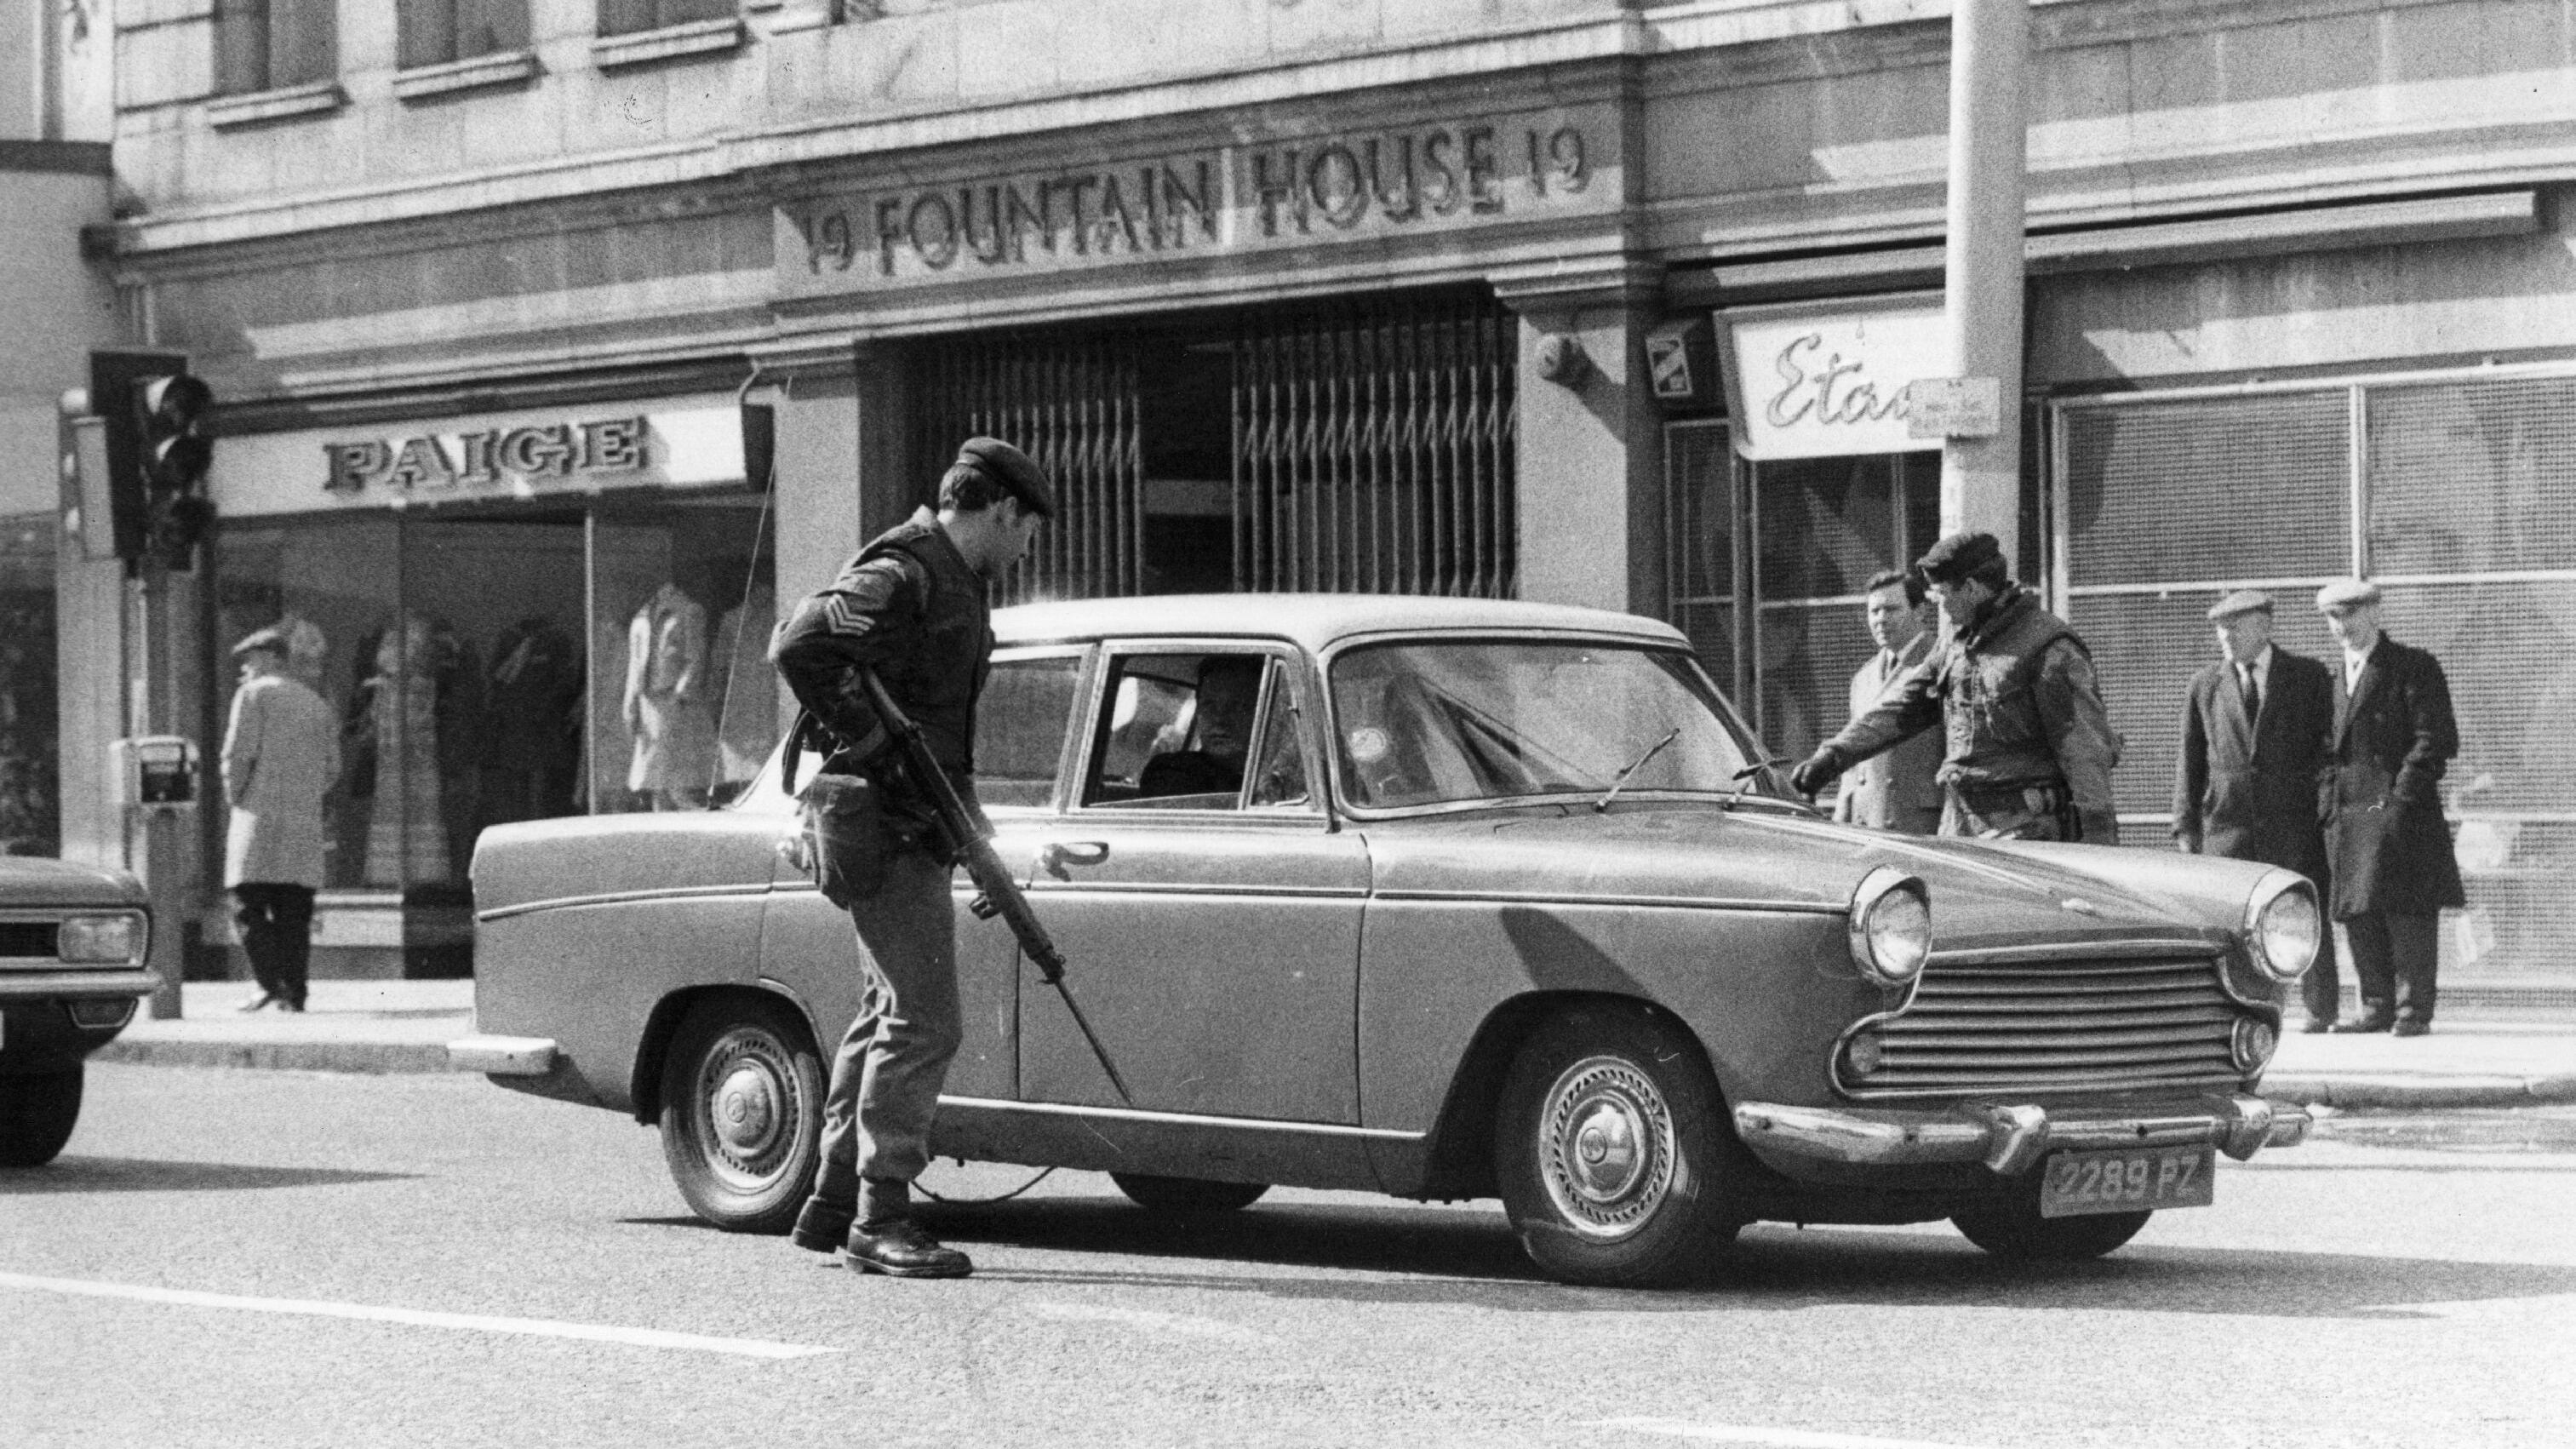 British soldiers patrolling the streets of Belfast in 1972